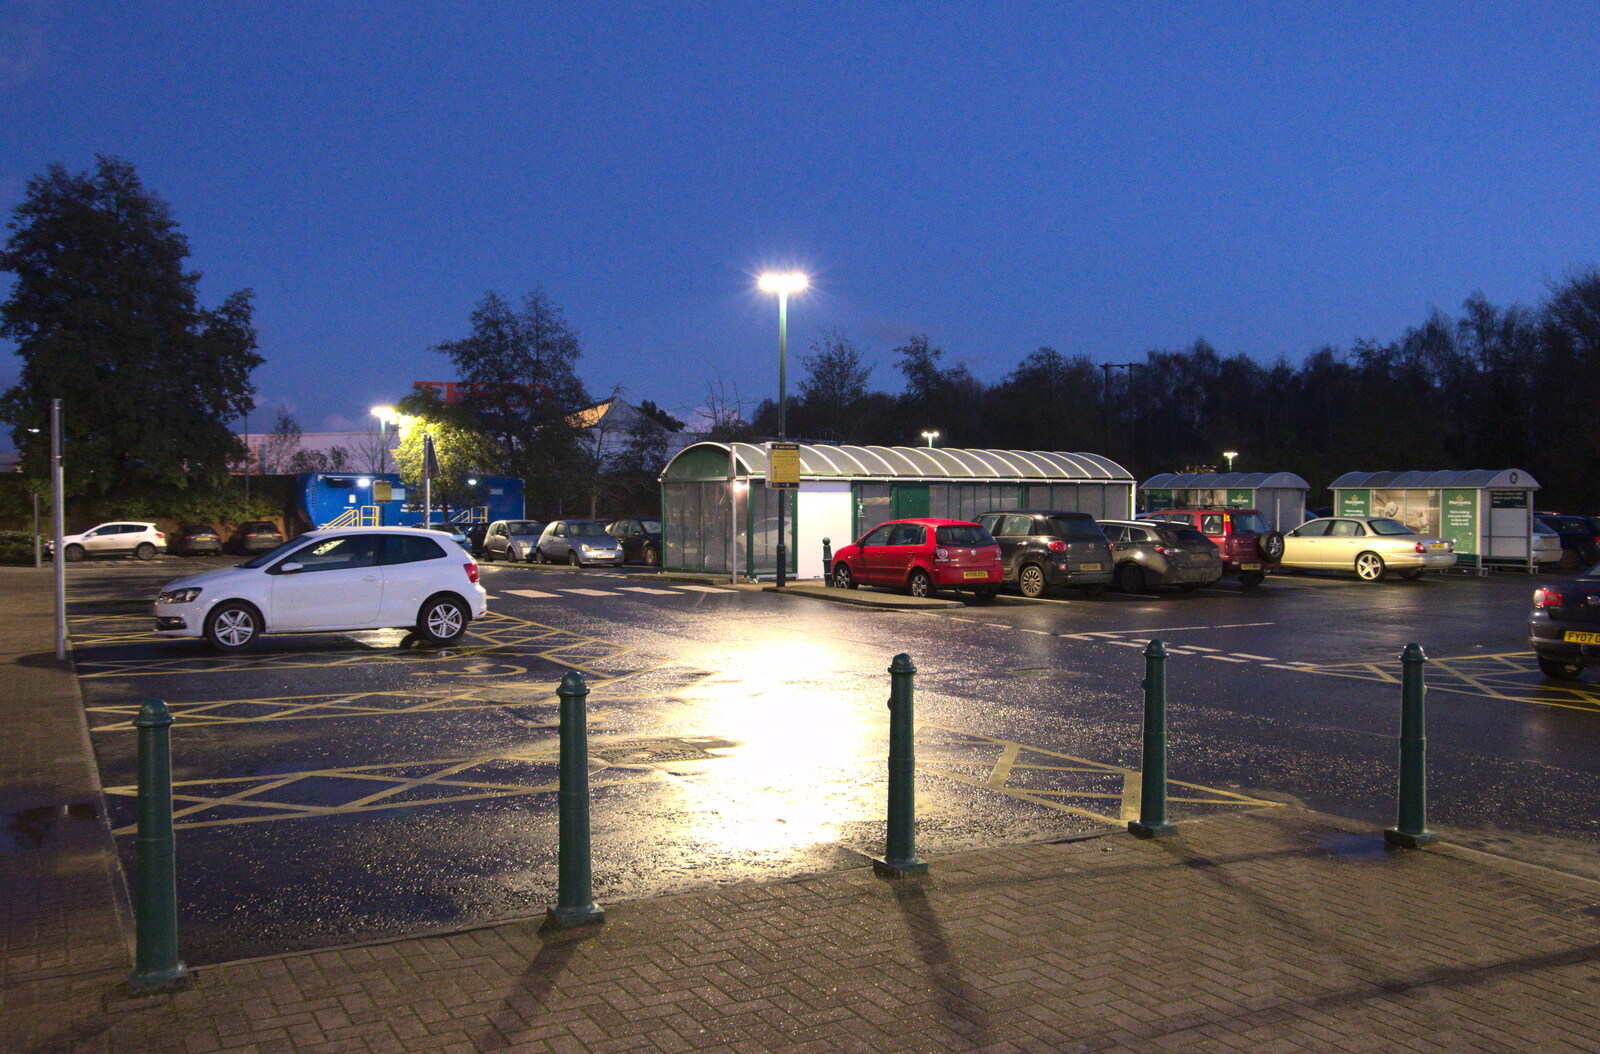 The joys of Morrisons' car park from A Return to the Oaksmere, Brome, Suffolk - 8th December 2020